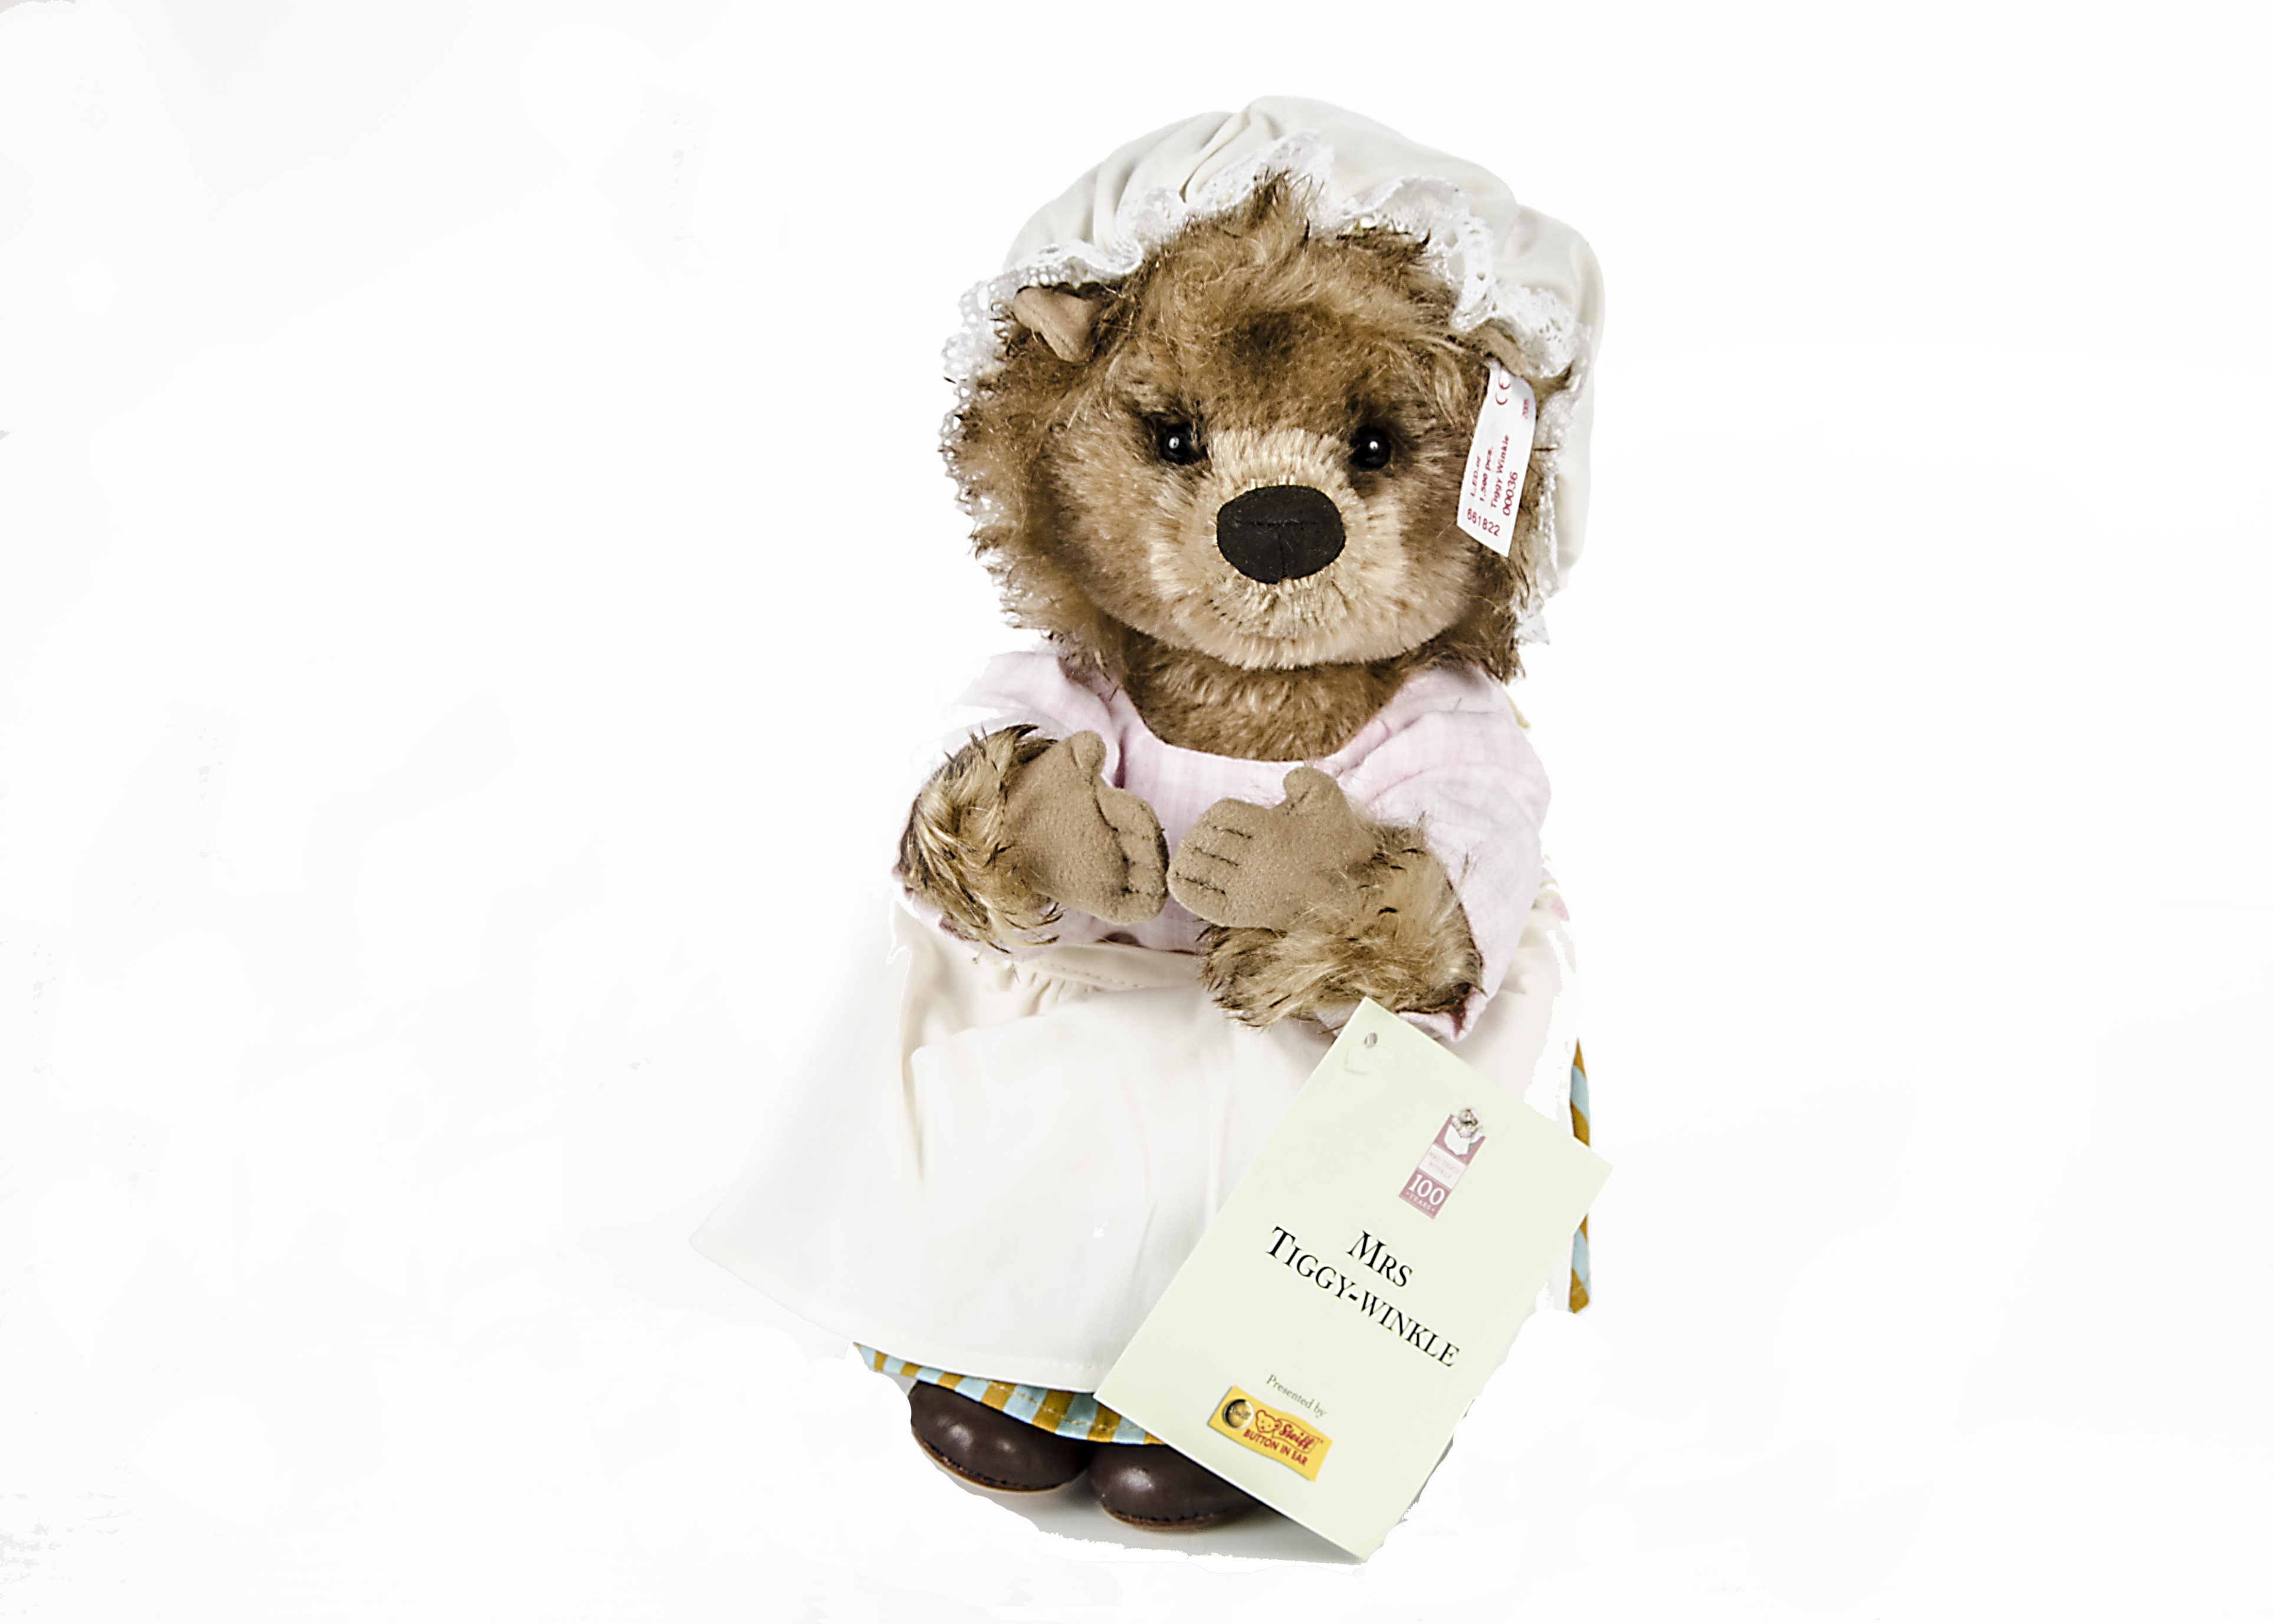 A Steiff Limited Edition Mrs Tiggy - Winkle, 36 of 1500, in original box with certificate, 2005